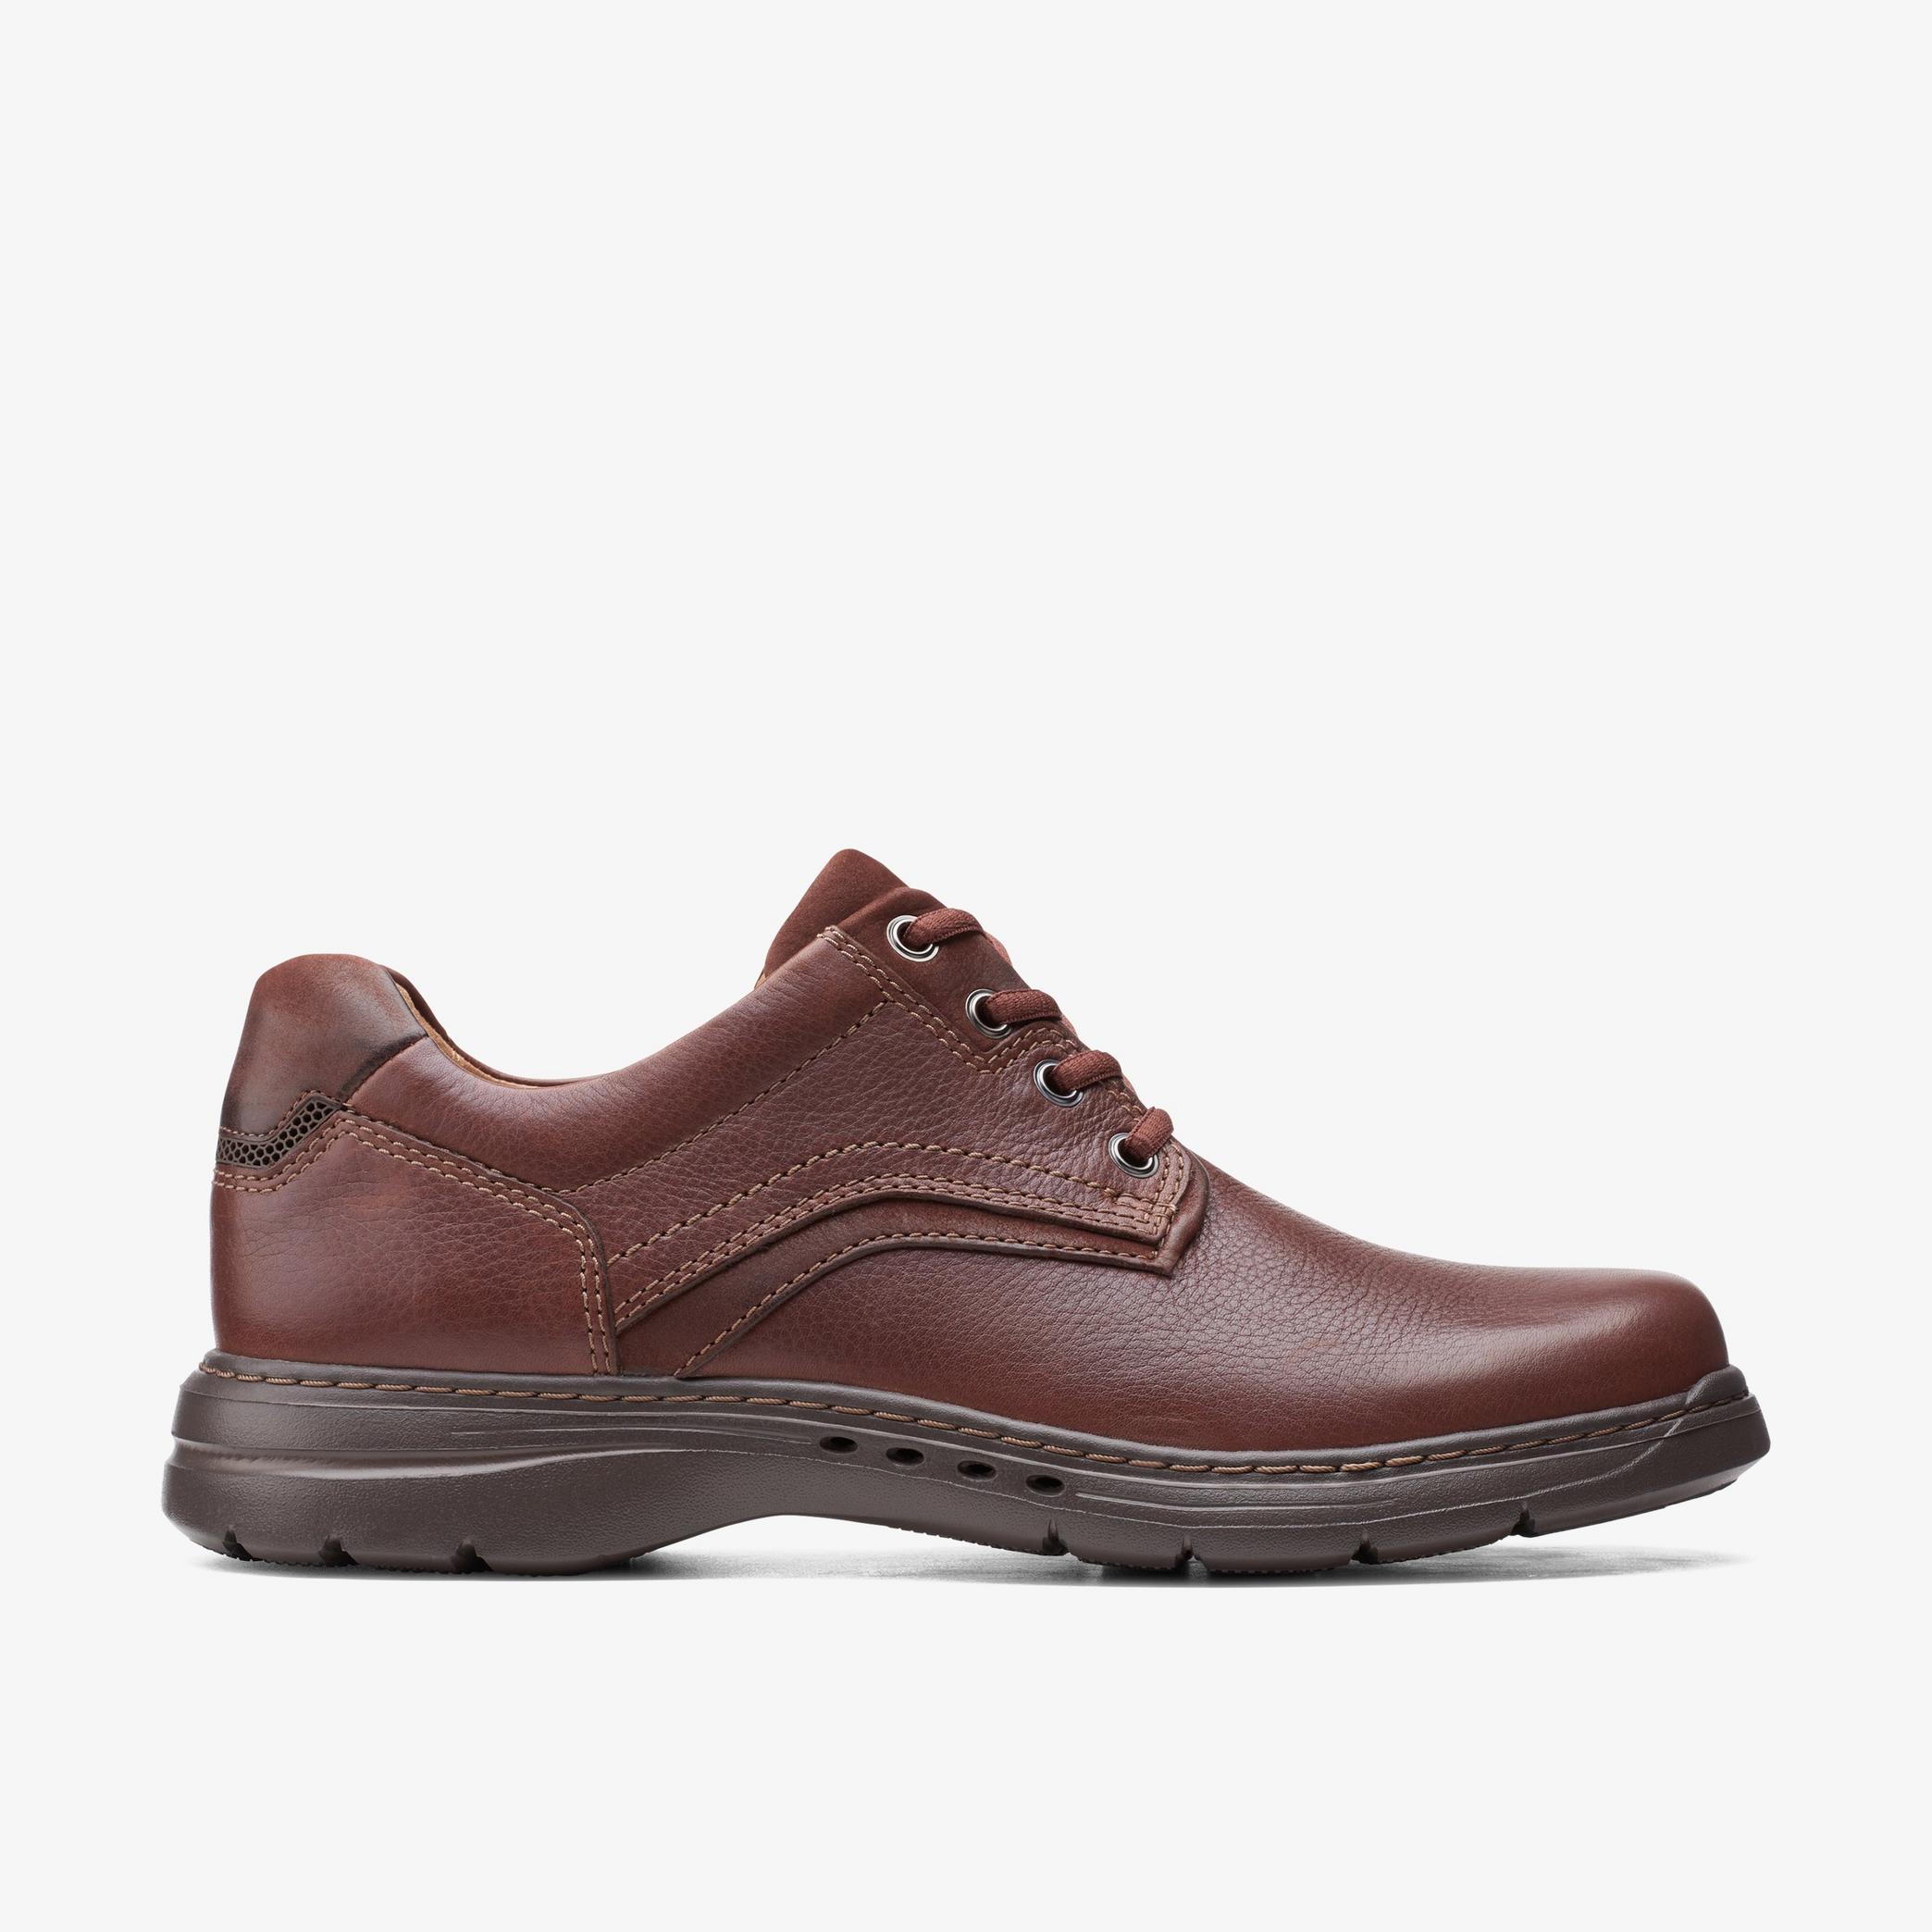 Men Un Brawley Pace Mahogany Tumbled Leather Shoes | Clarks US